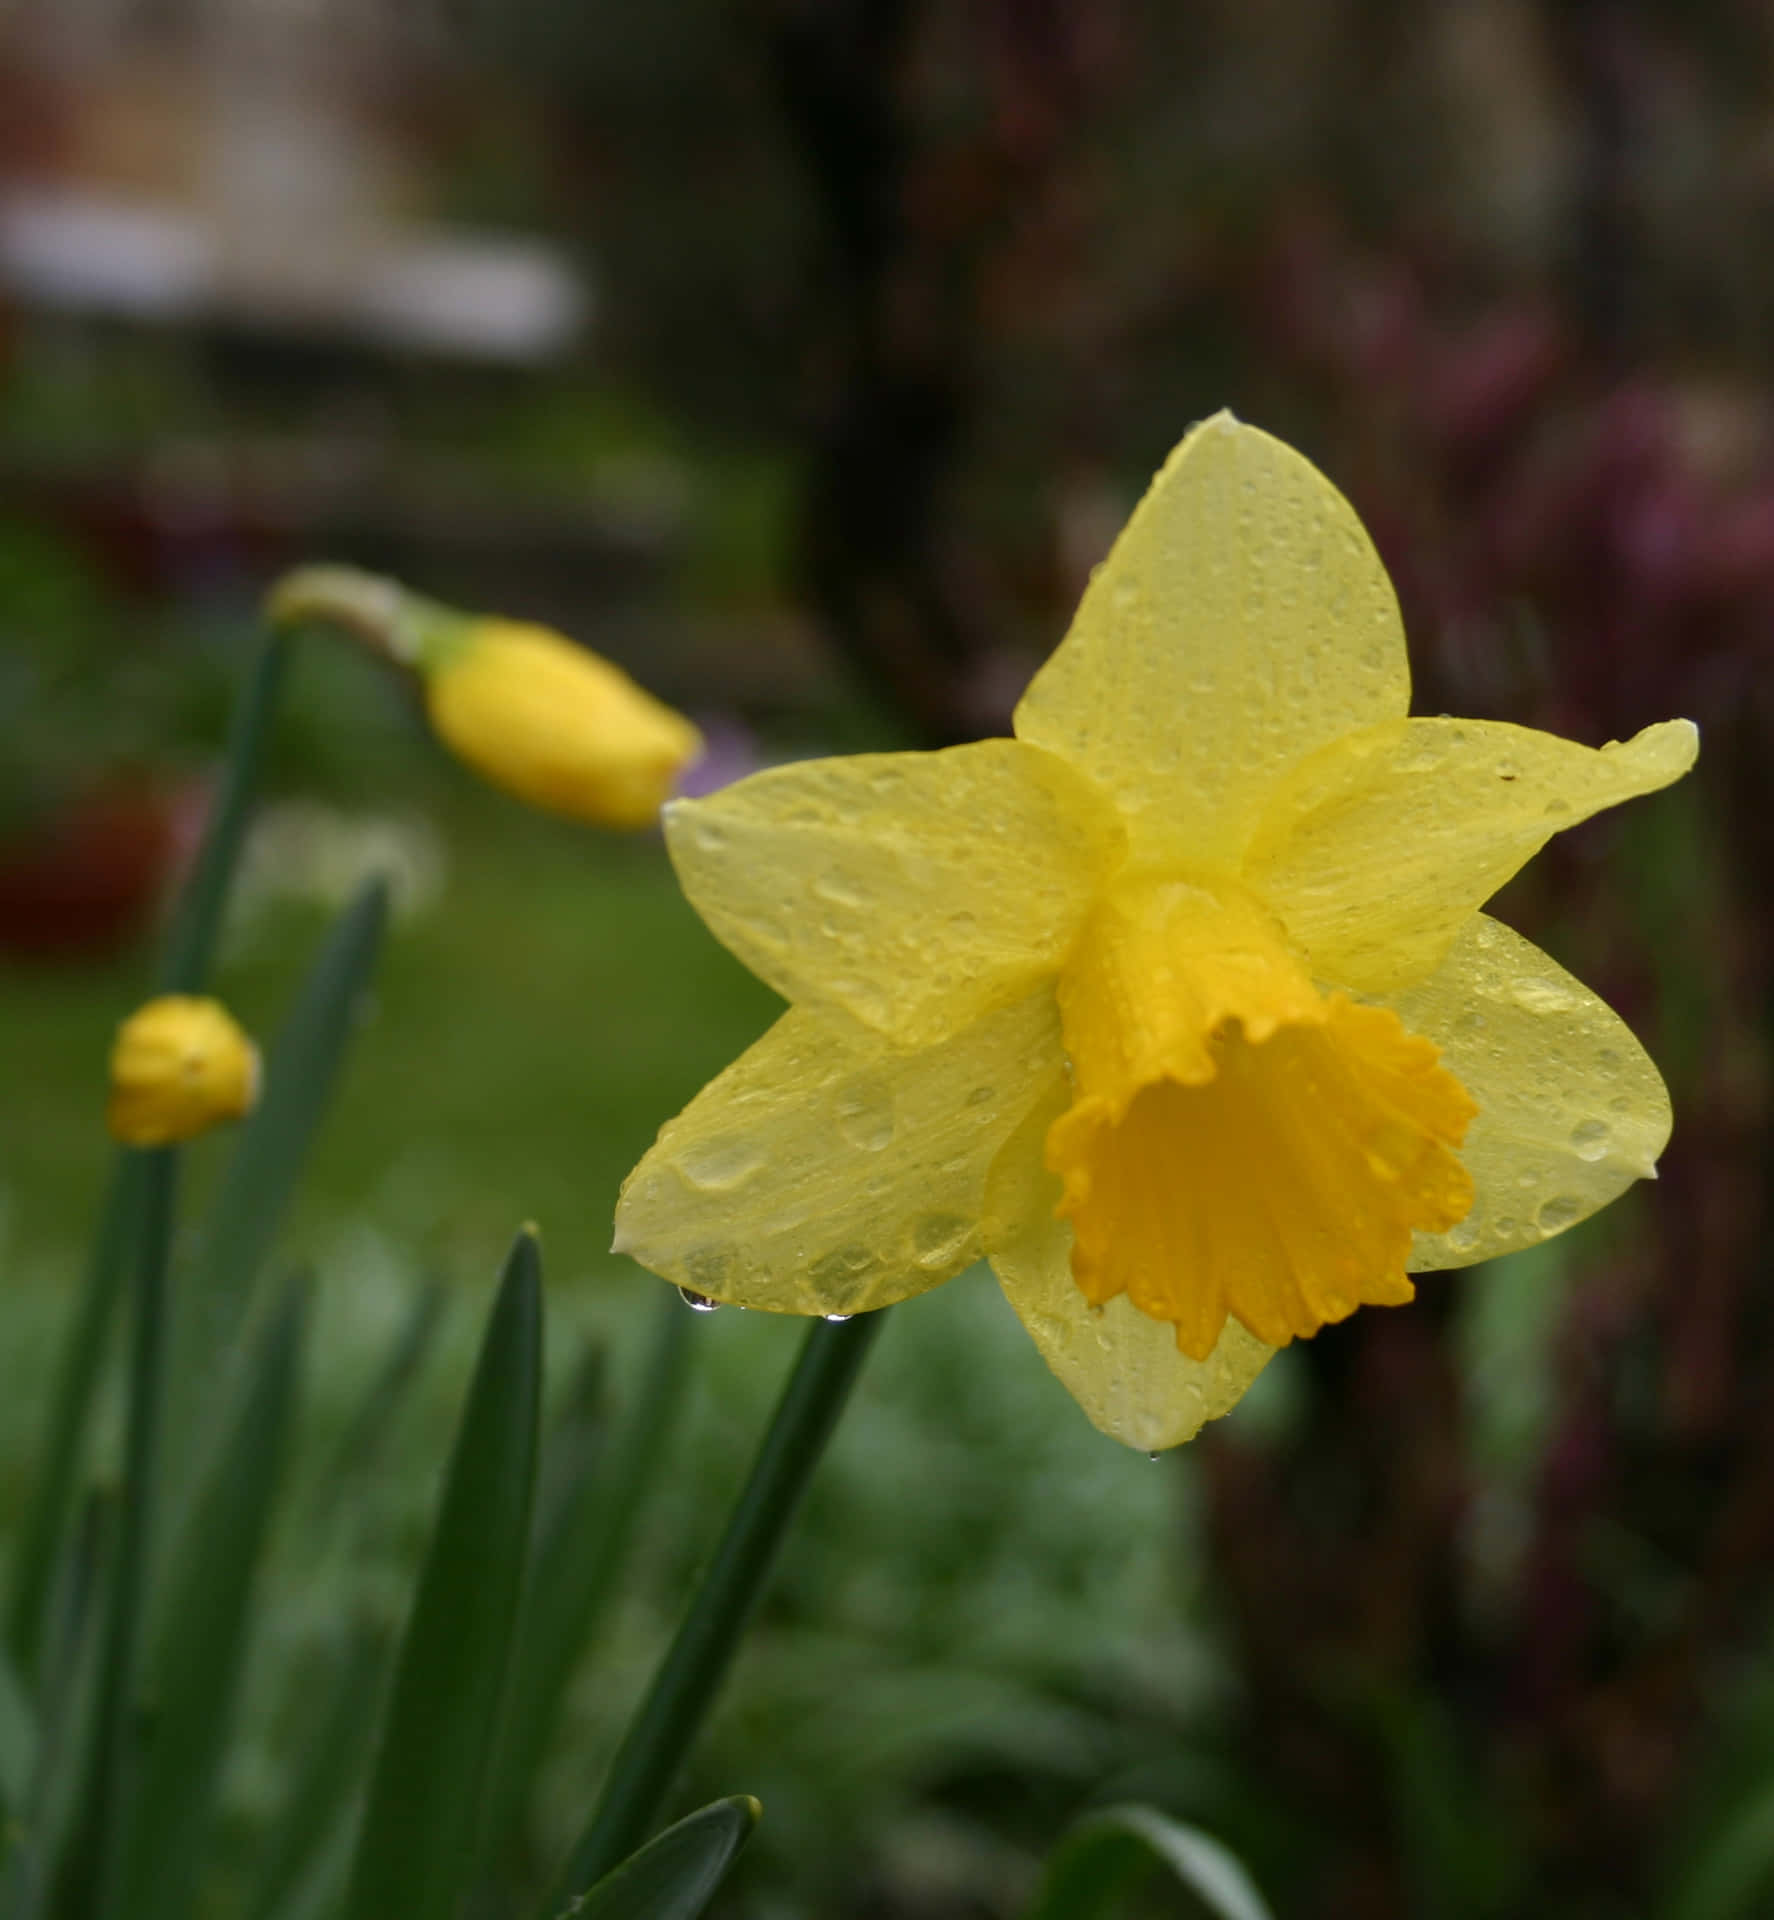 A dazzling daffodil in full bloom to brighten anyone's day